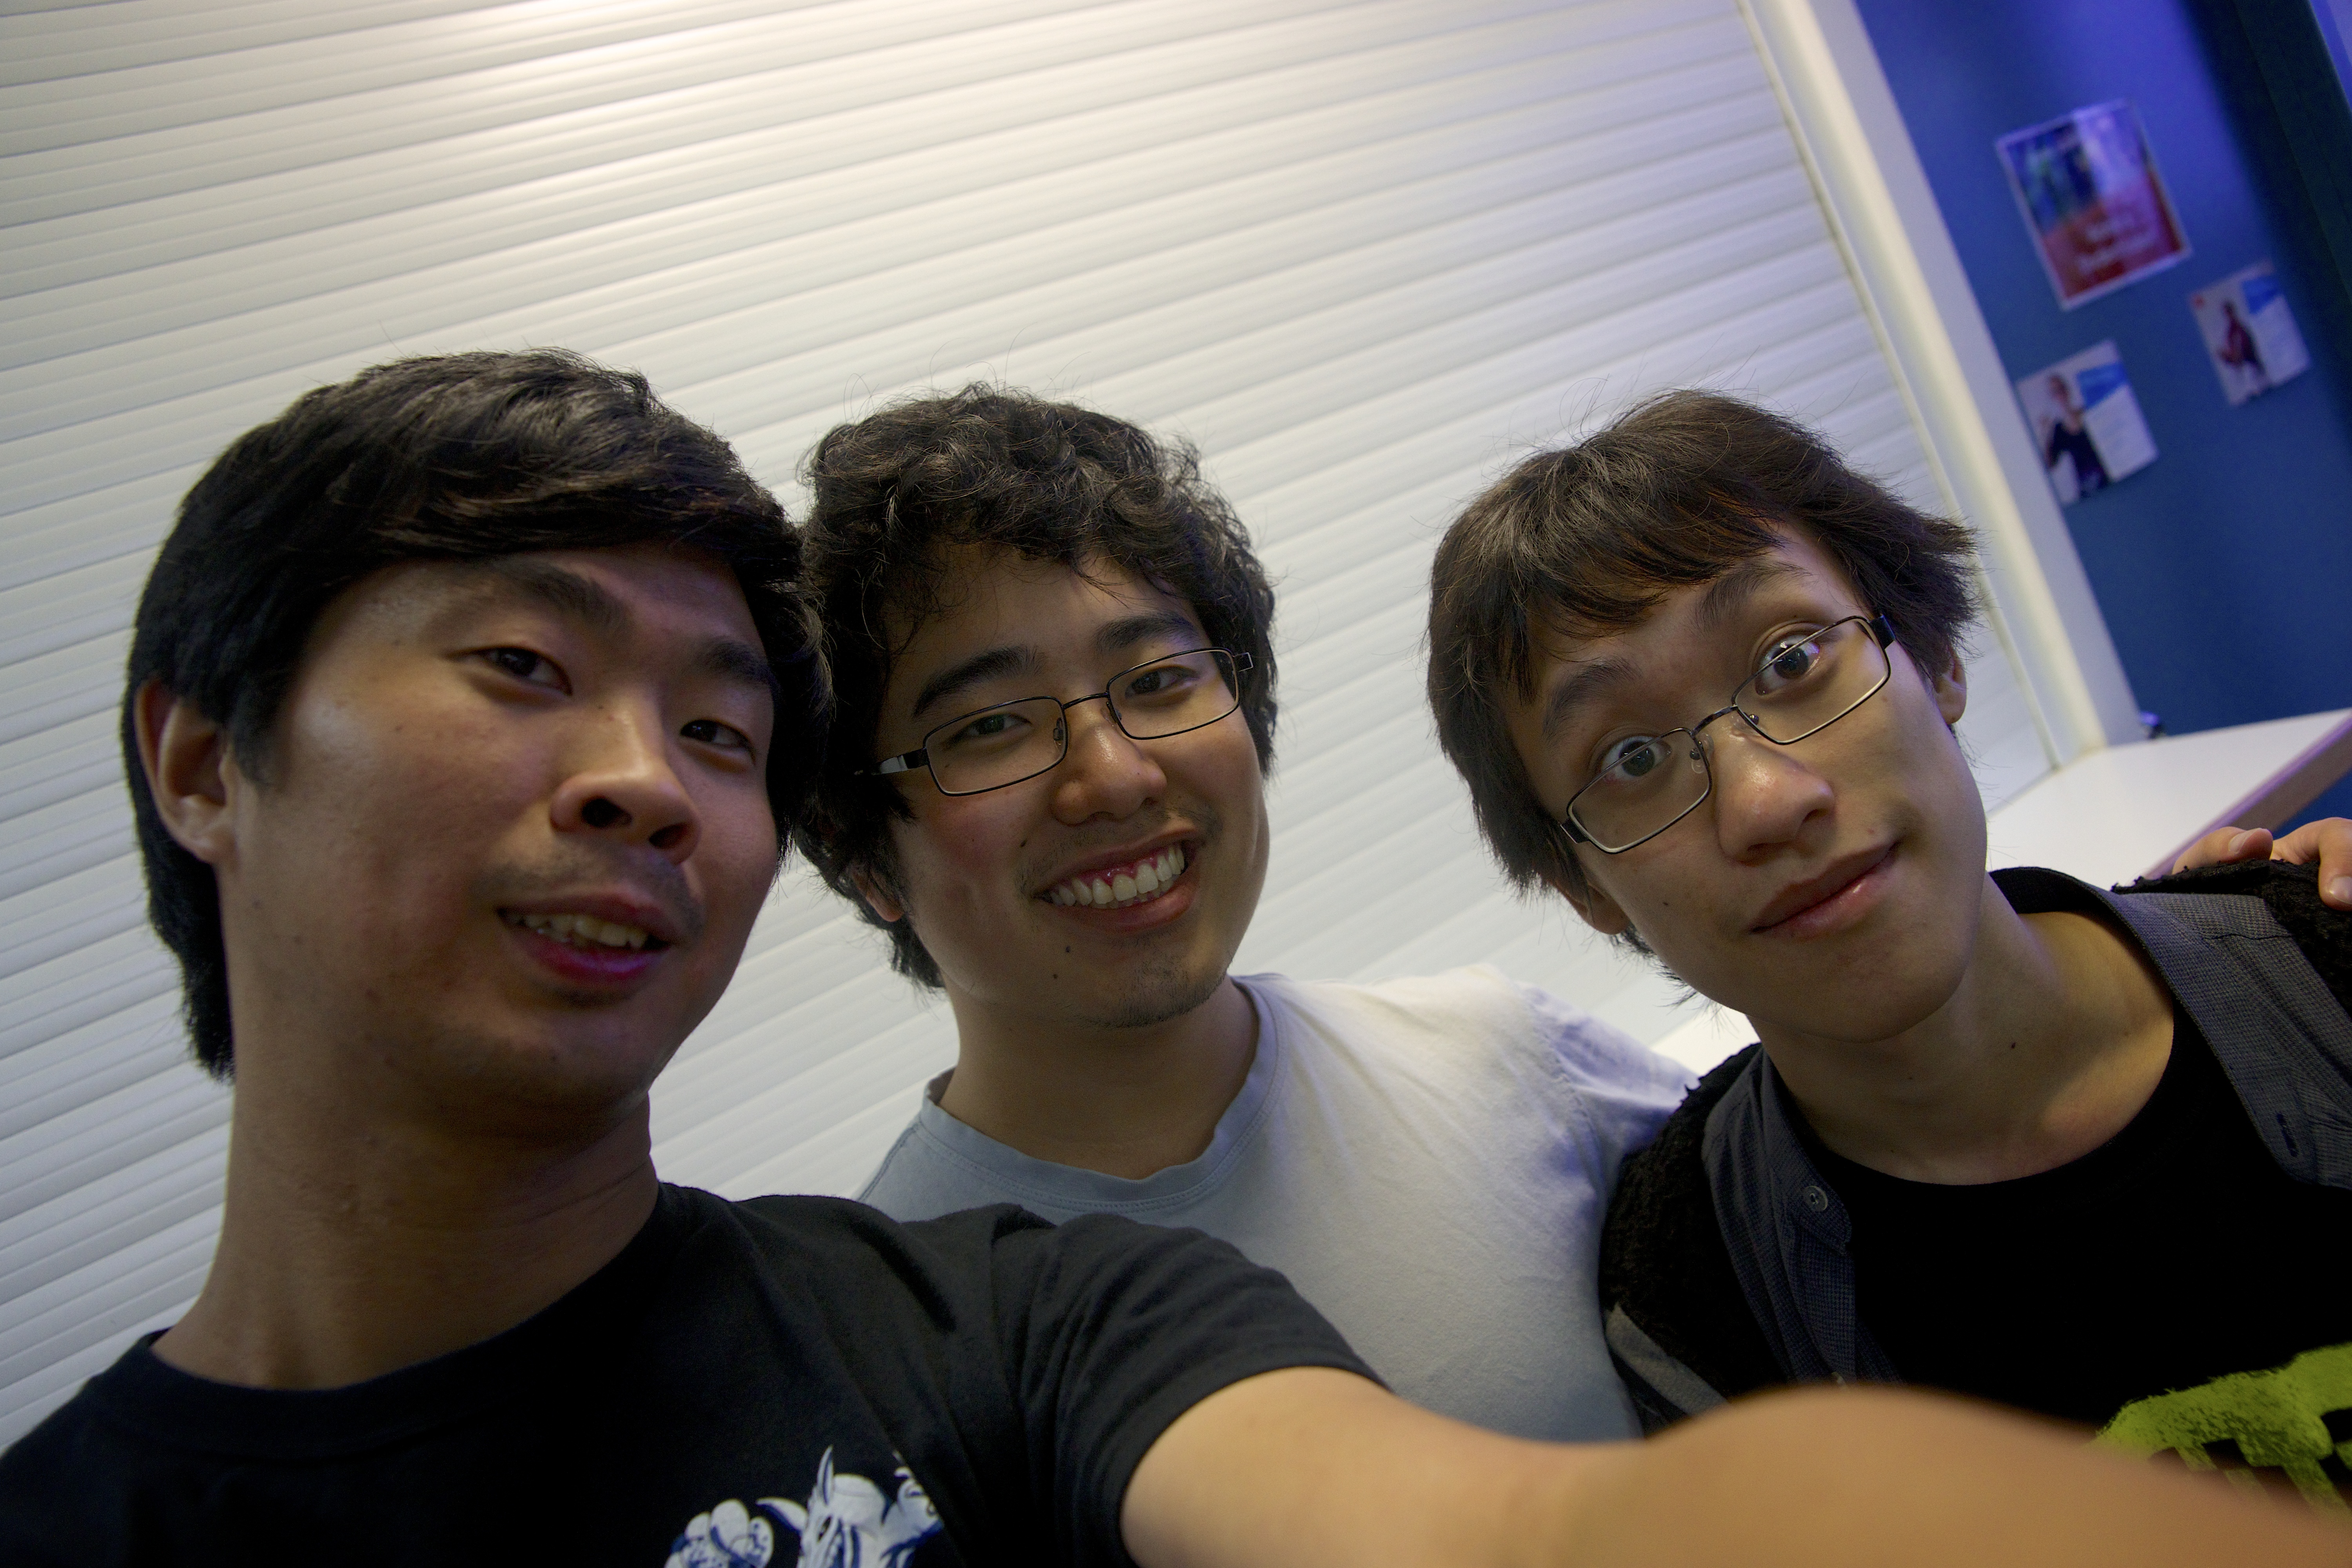 Team Photo (Left to Right): Xavier Ho, Hanley Weng, Cameron Lai